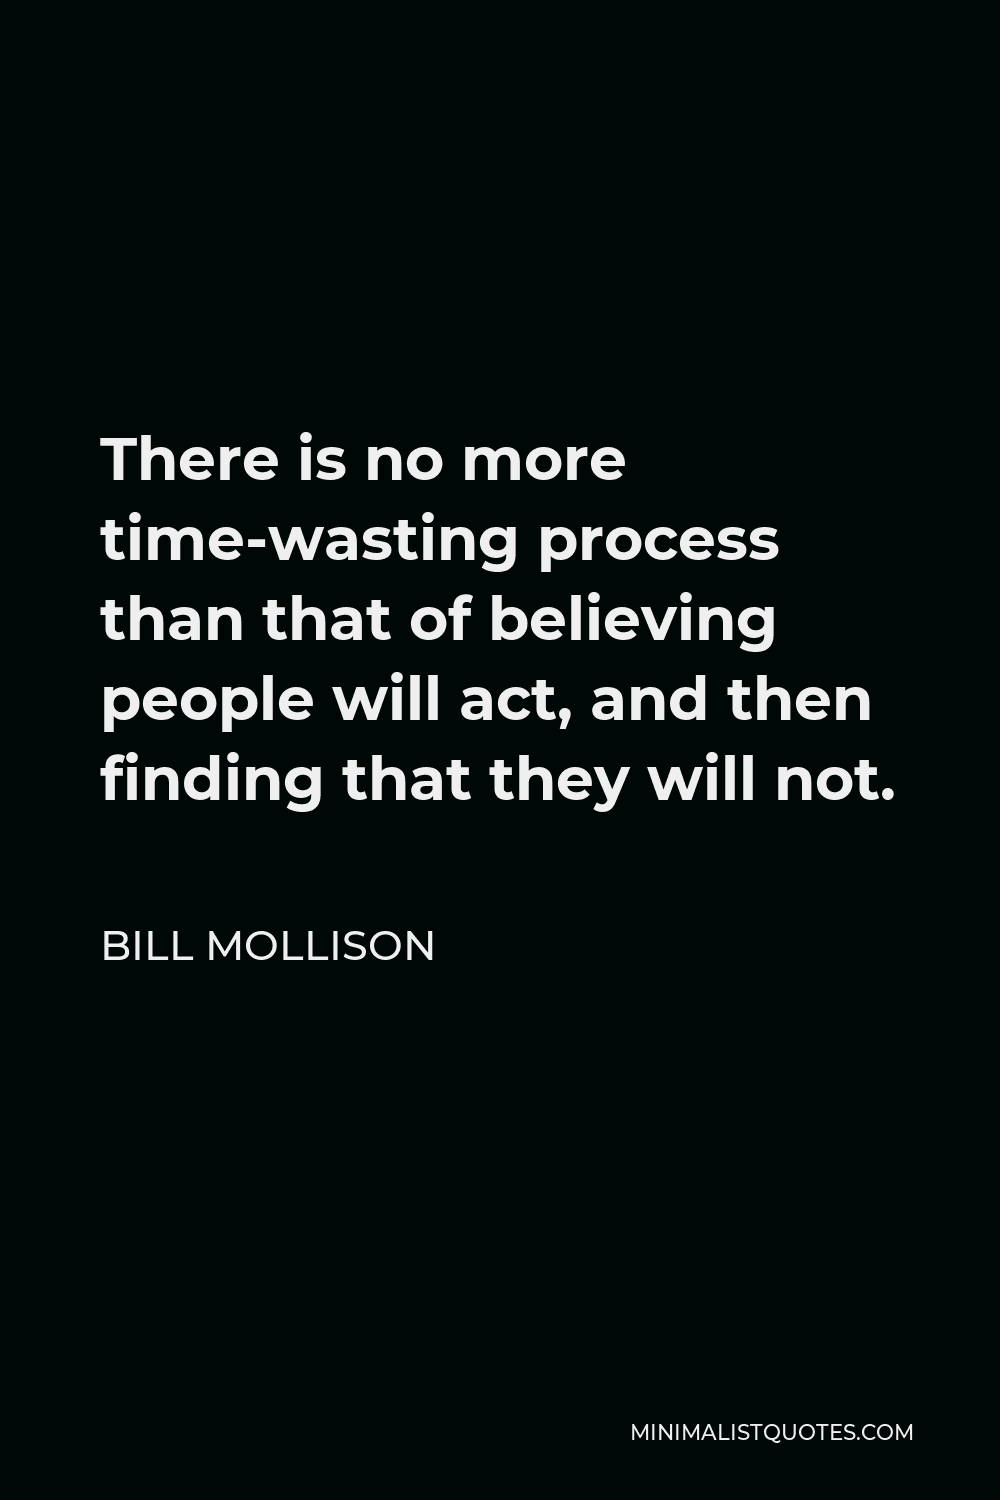 Bill Mollison Quote - There is no more time-wasting process than that of believing people will act, and then finding that they will not.